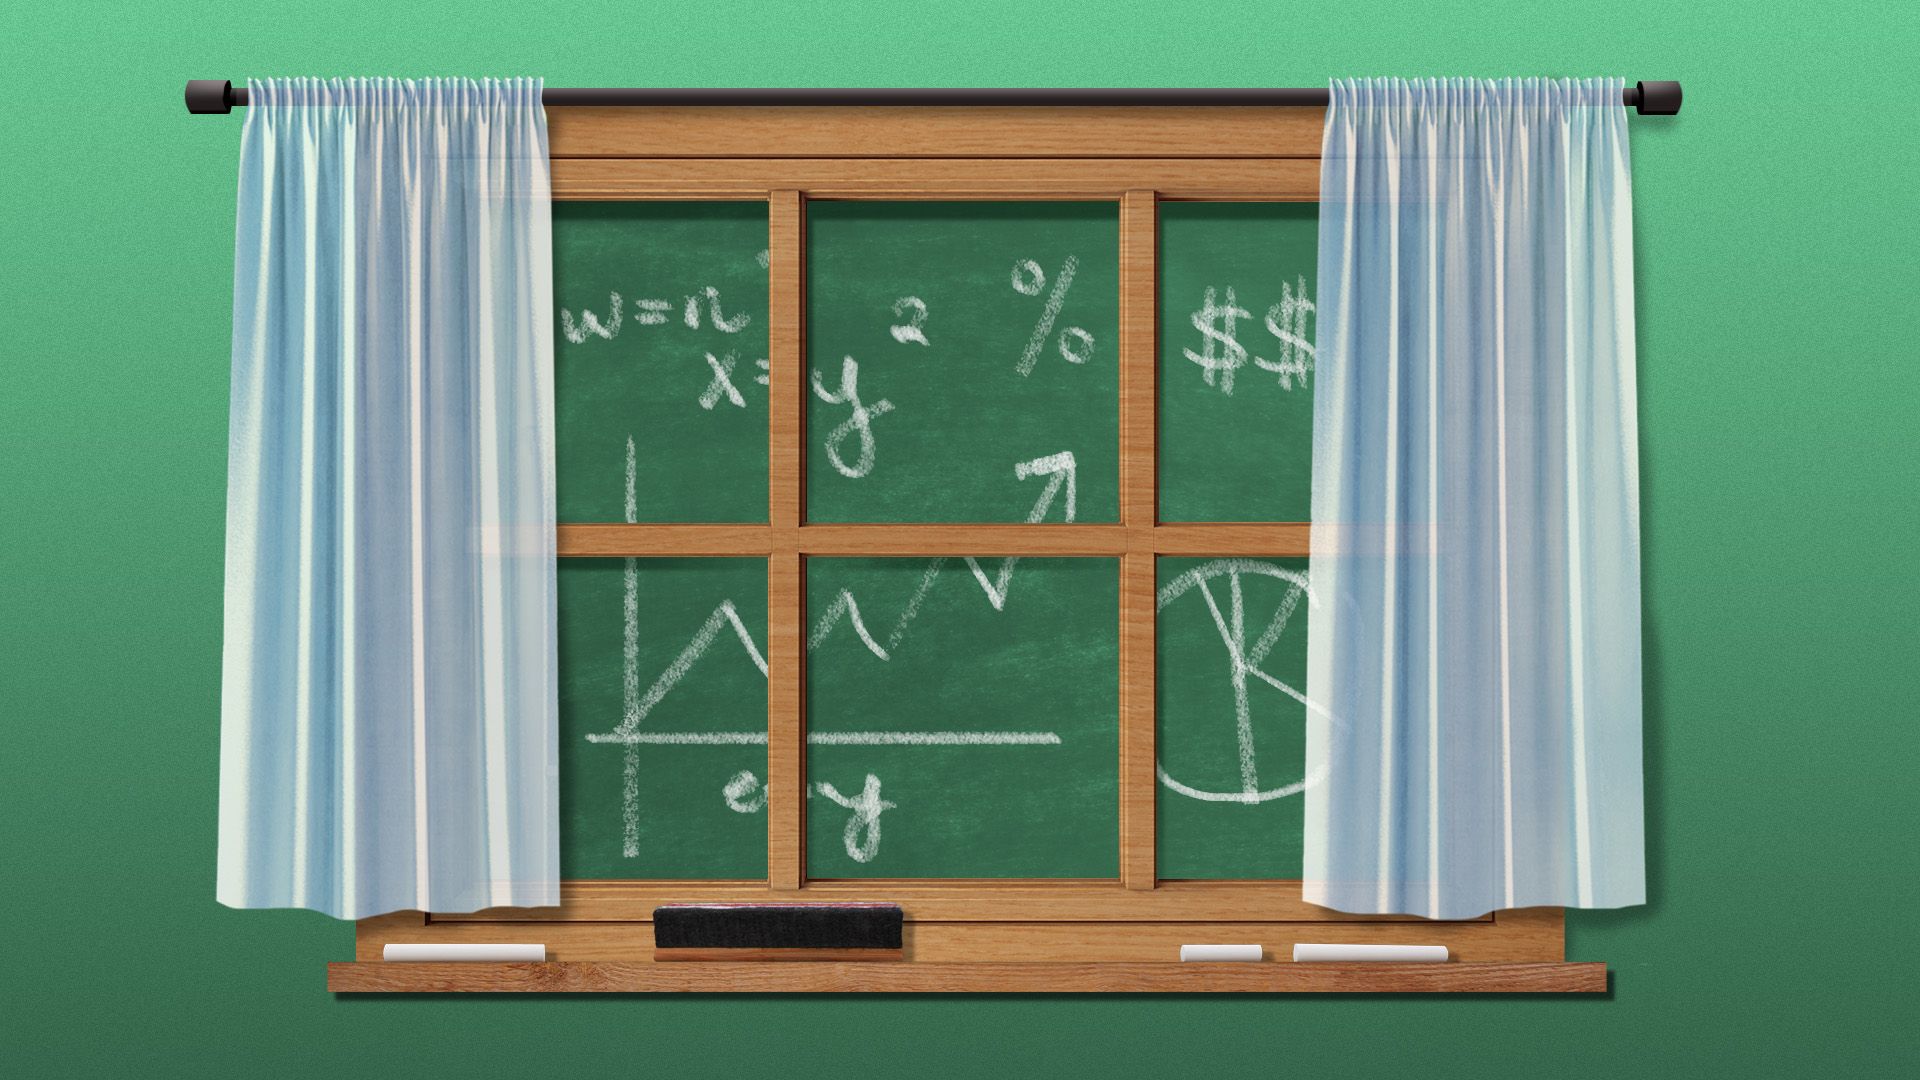 Illustration of a chalkboard with economic symbols viewed through a window with curtains